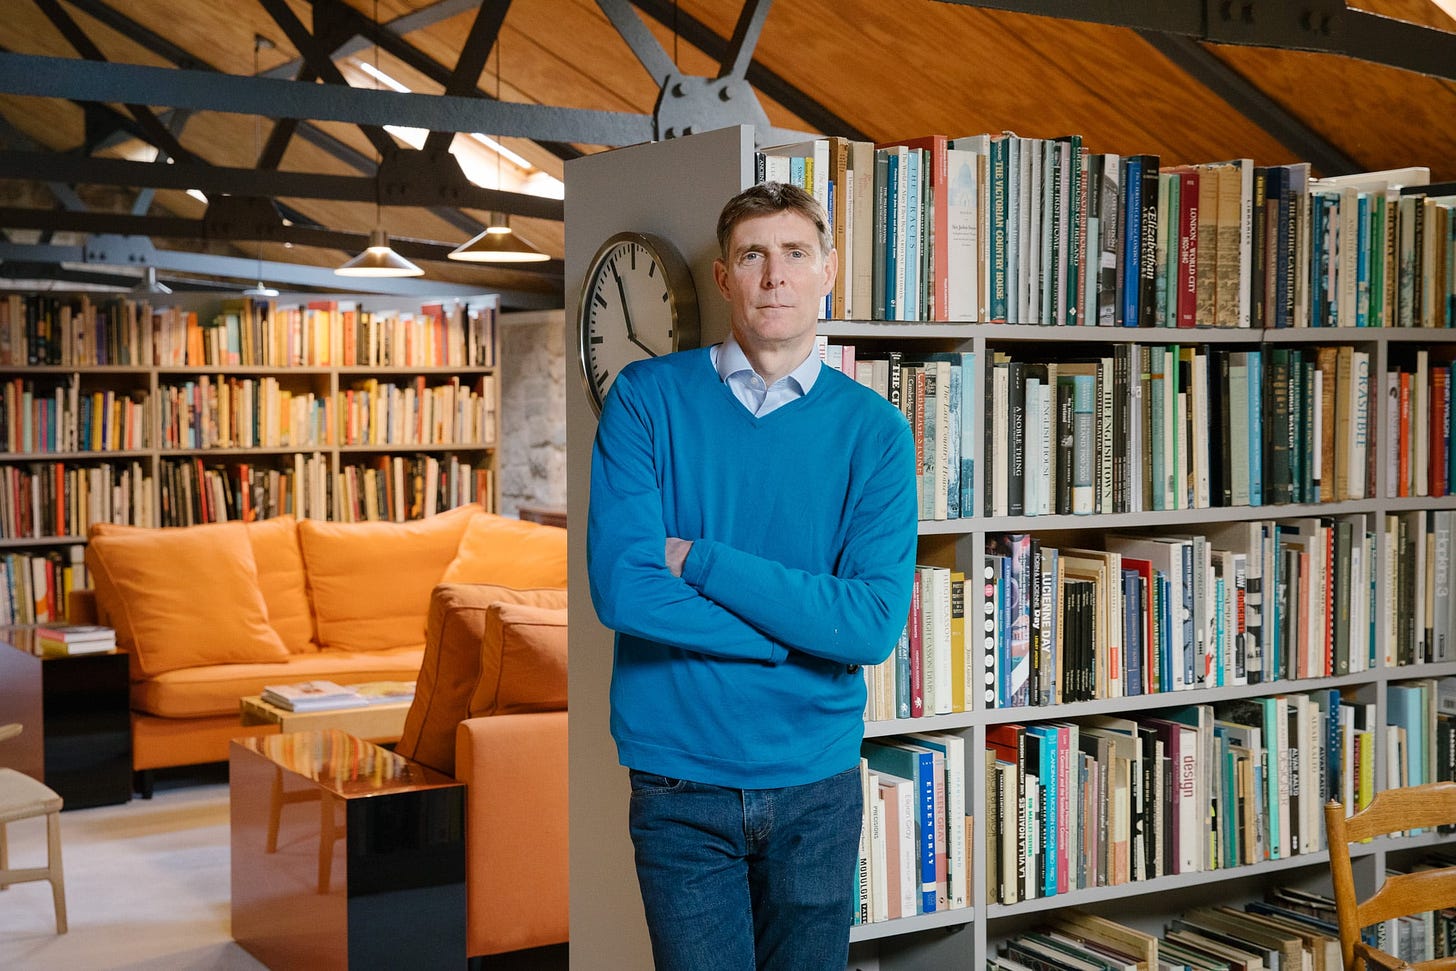 A portrait of Corin Mellor wearing a v-neck jumper and shirt. He is leaning on the corner of a bookcase with books also behind him.